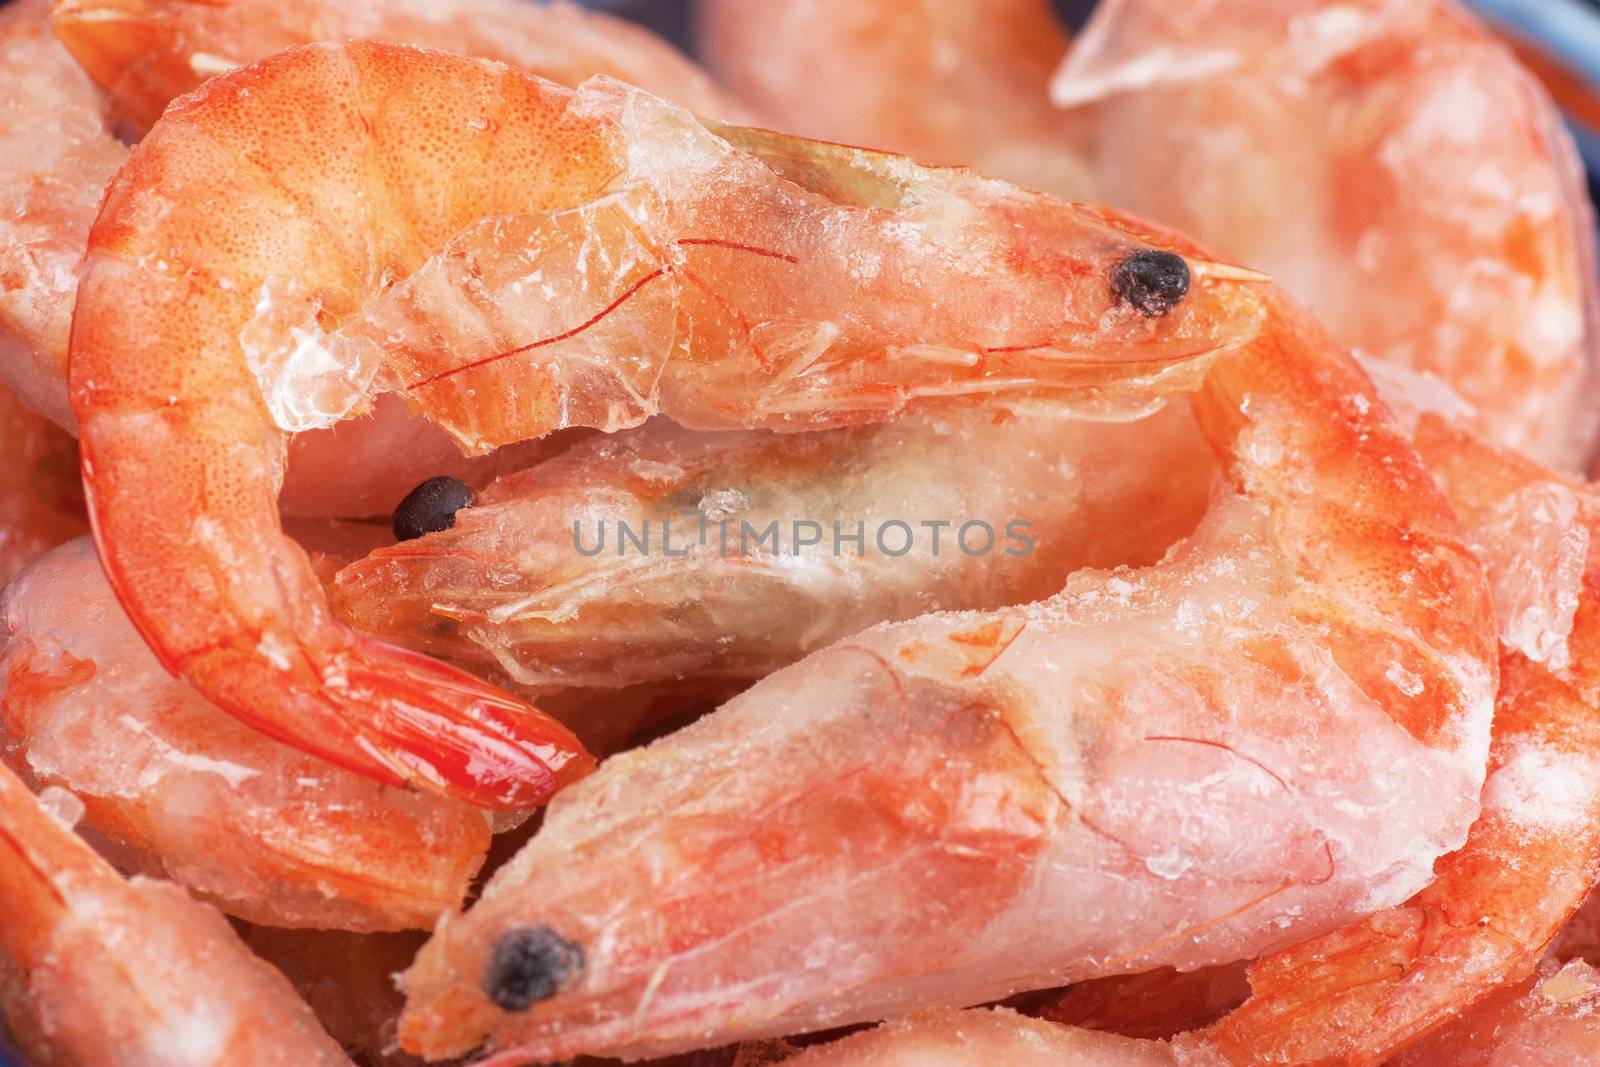 Frozen shrimps by AGorohov